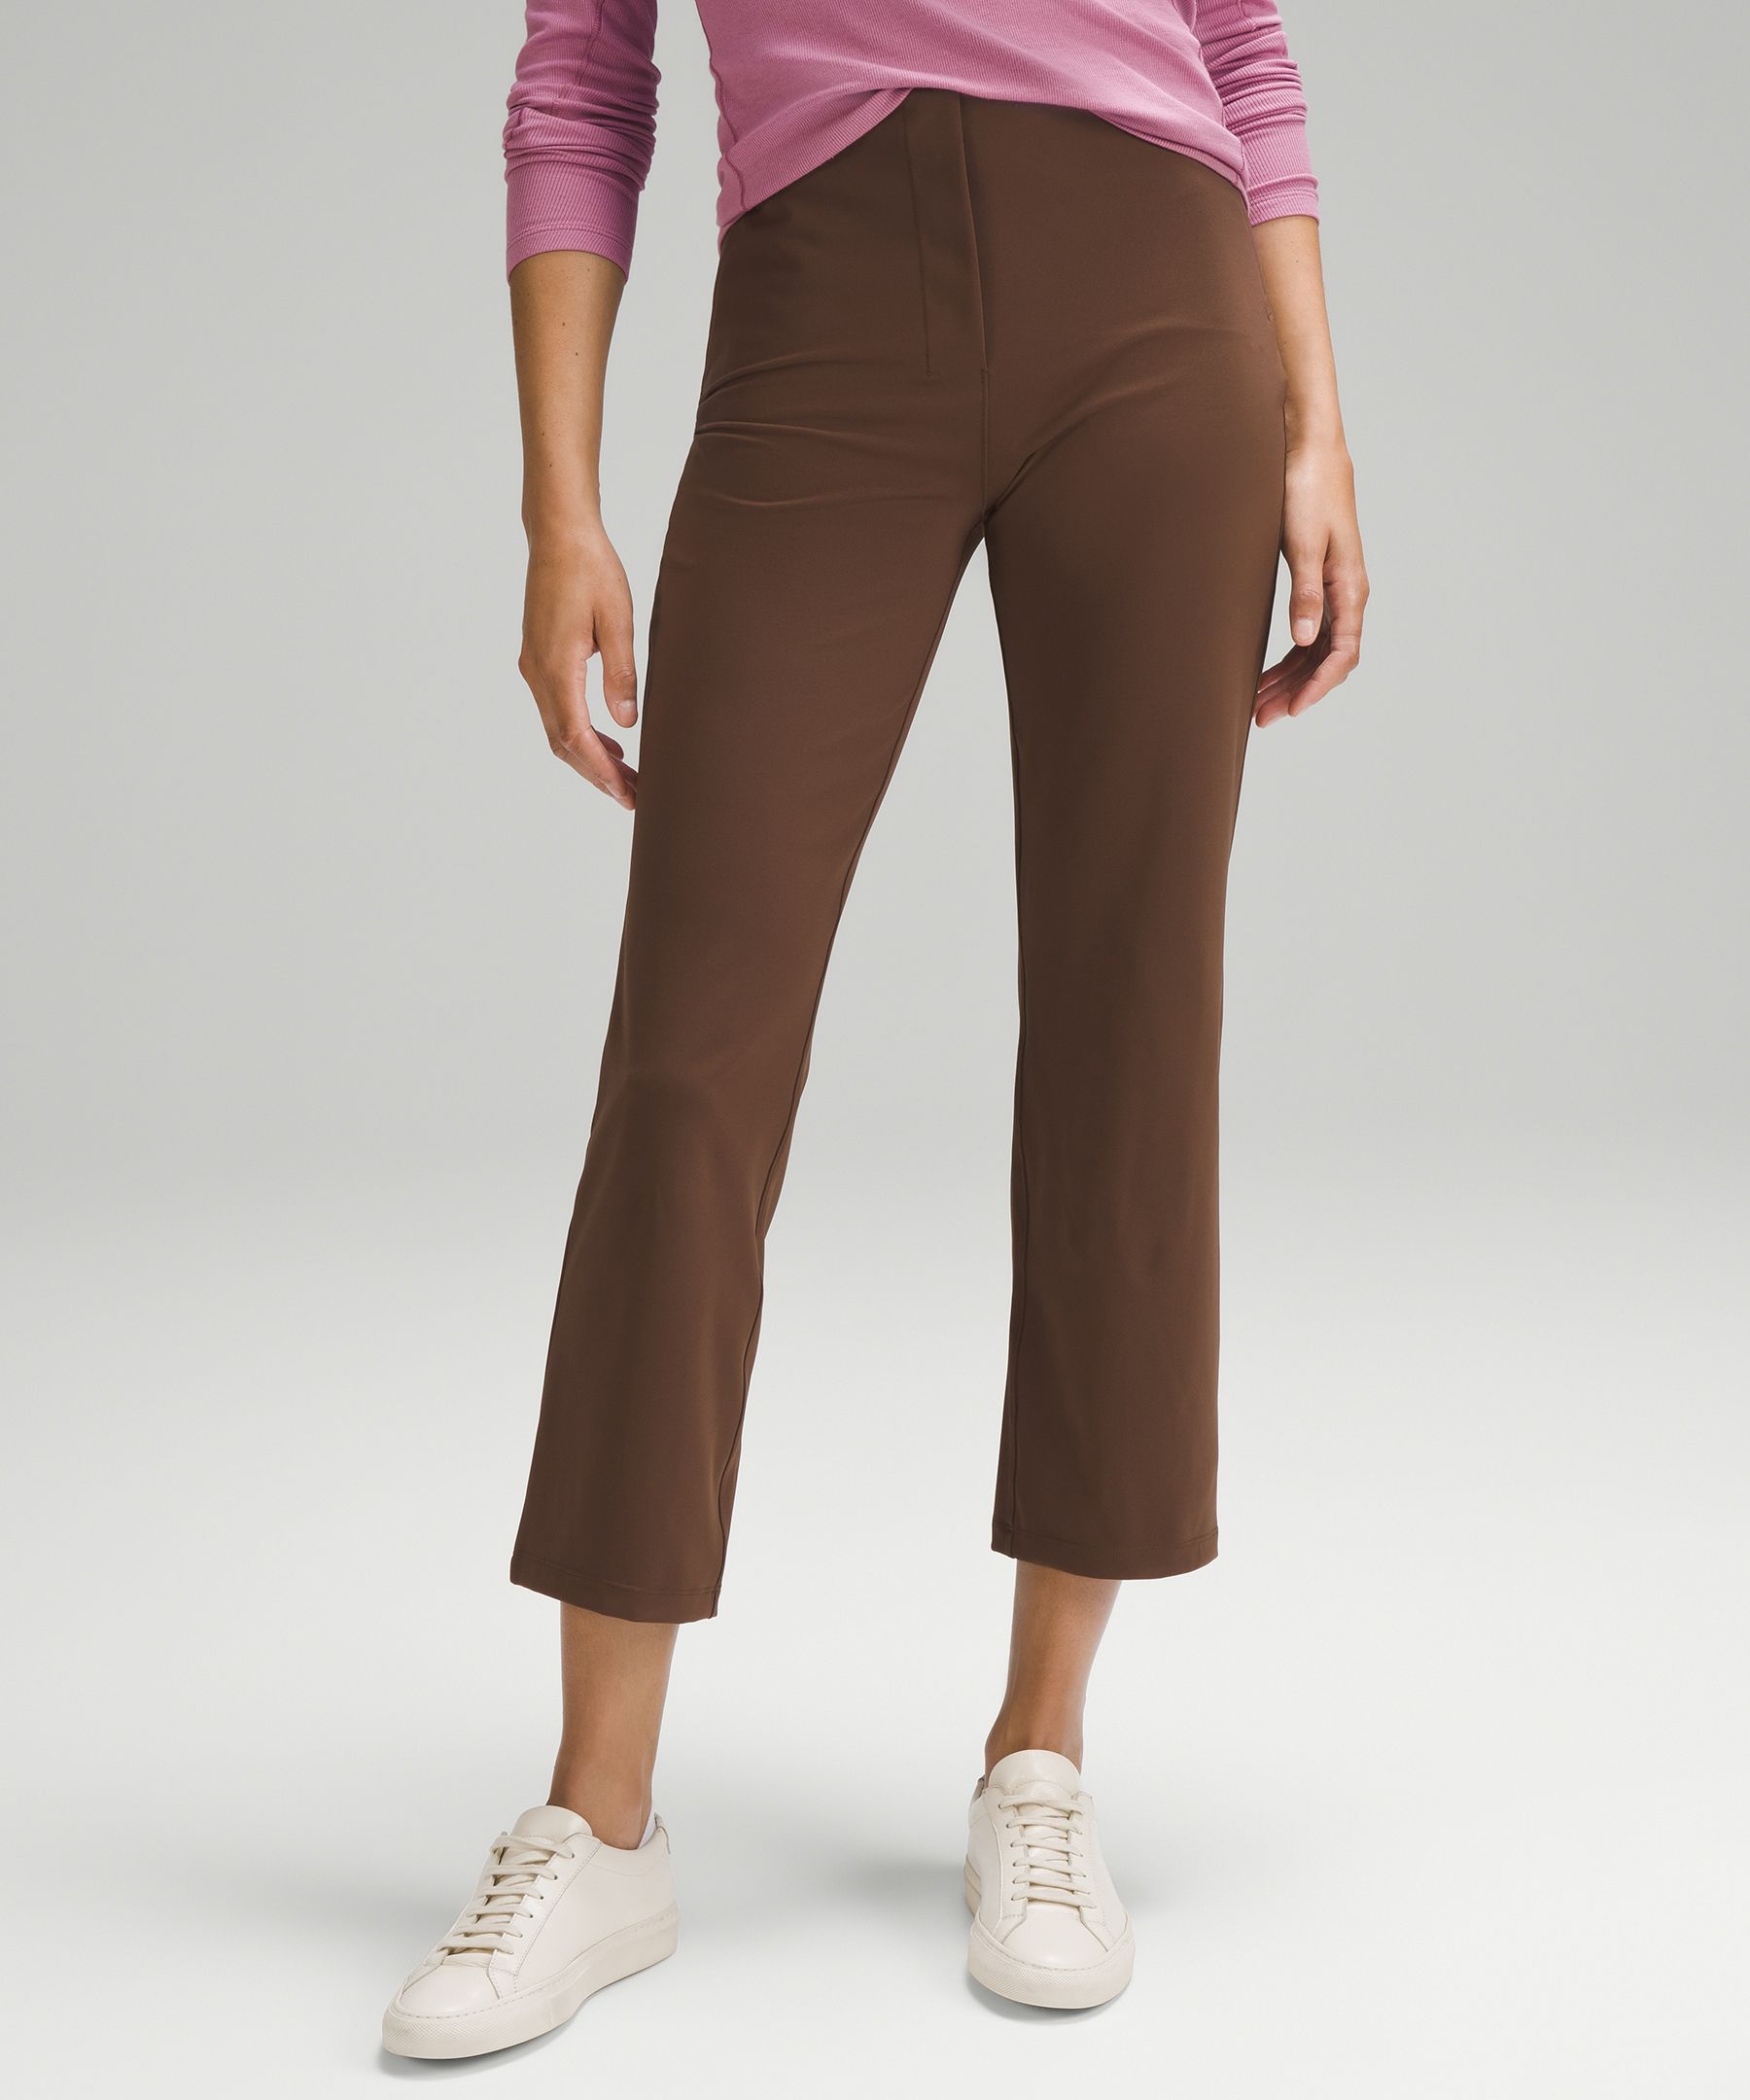 Lululemon Smooth Fit Pull-on High-rise Cropped Pants